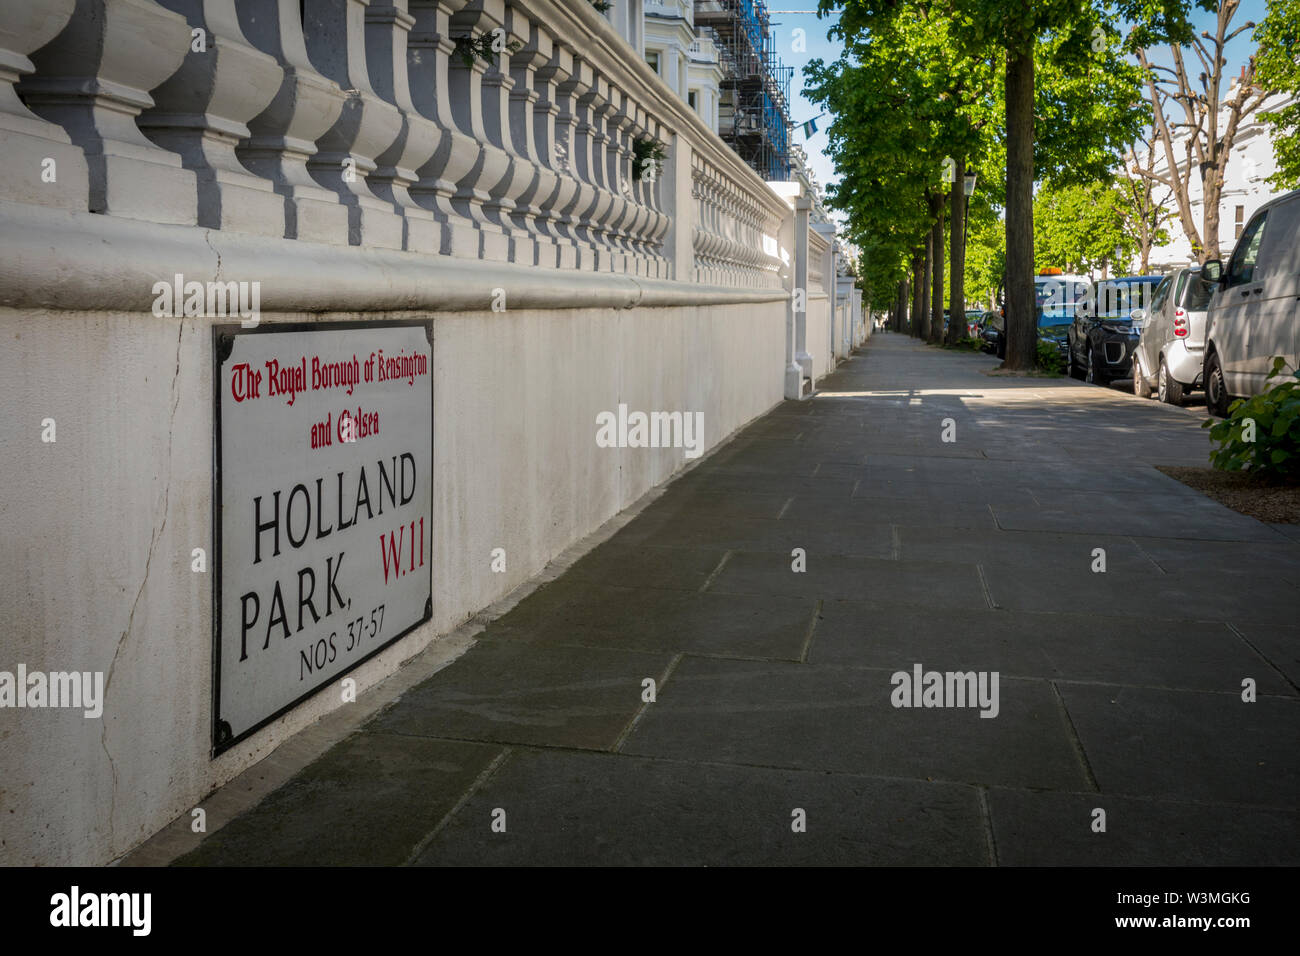 Street name road sign for Holland Park, The  Royal Borough of Kensington and Chelsea, W11, London, UK - Holland Park London Stock Photo